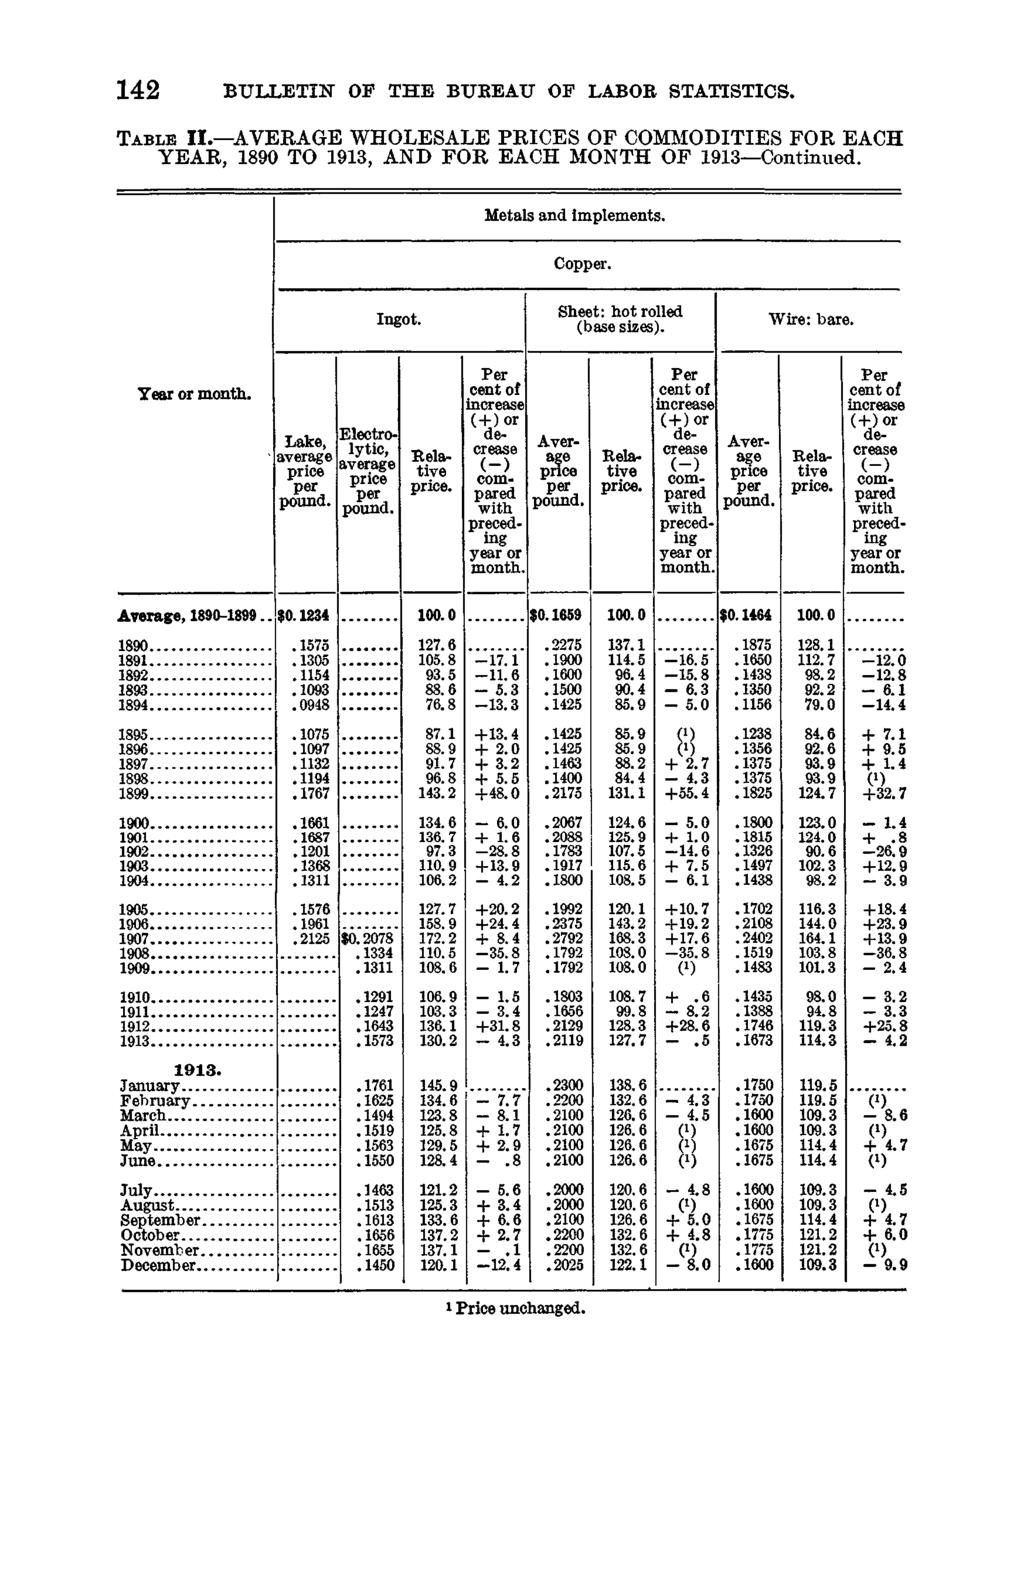 142 BULLETIN OE THE BUREAU OF LABOR STATISTICS. Table II. AVERAGE WHOLESALE PRICES OF COMMODITIES FOR EACH YEAR, 1890 TO 1913, AND FOR EACH MONTH OF 1913 Continued. Metals and implements. Copper.